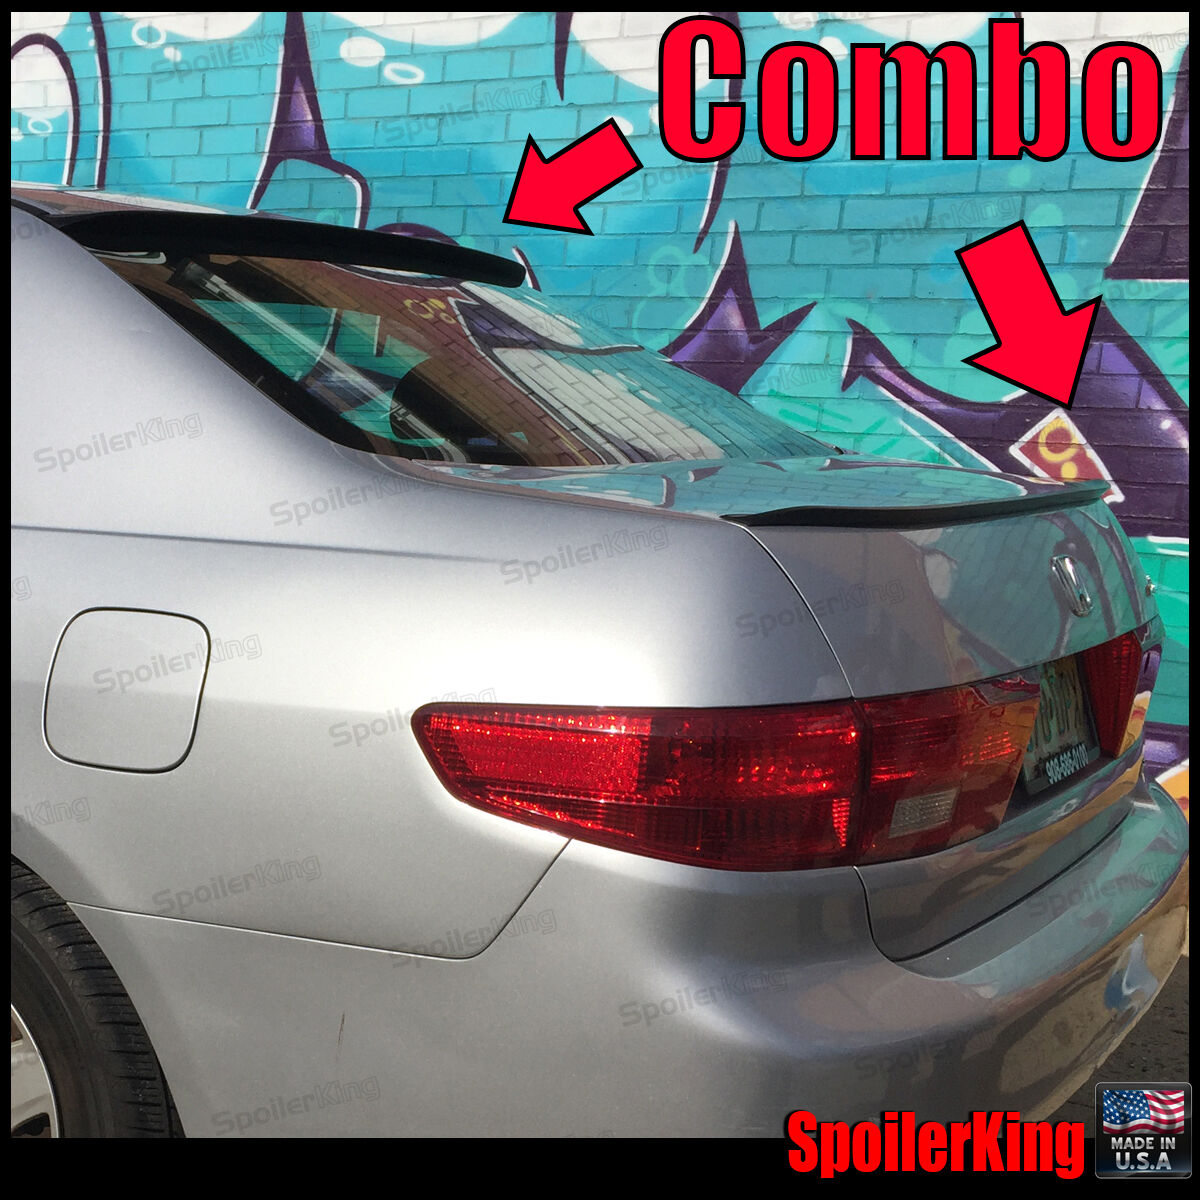 COMBO Spoilers (Fits: Accord 2003-05 4dr) Rear Roof Wing & Trunk Lip 284R/244L